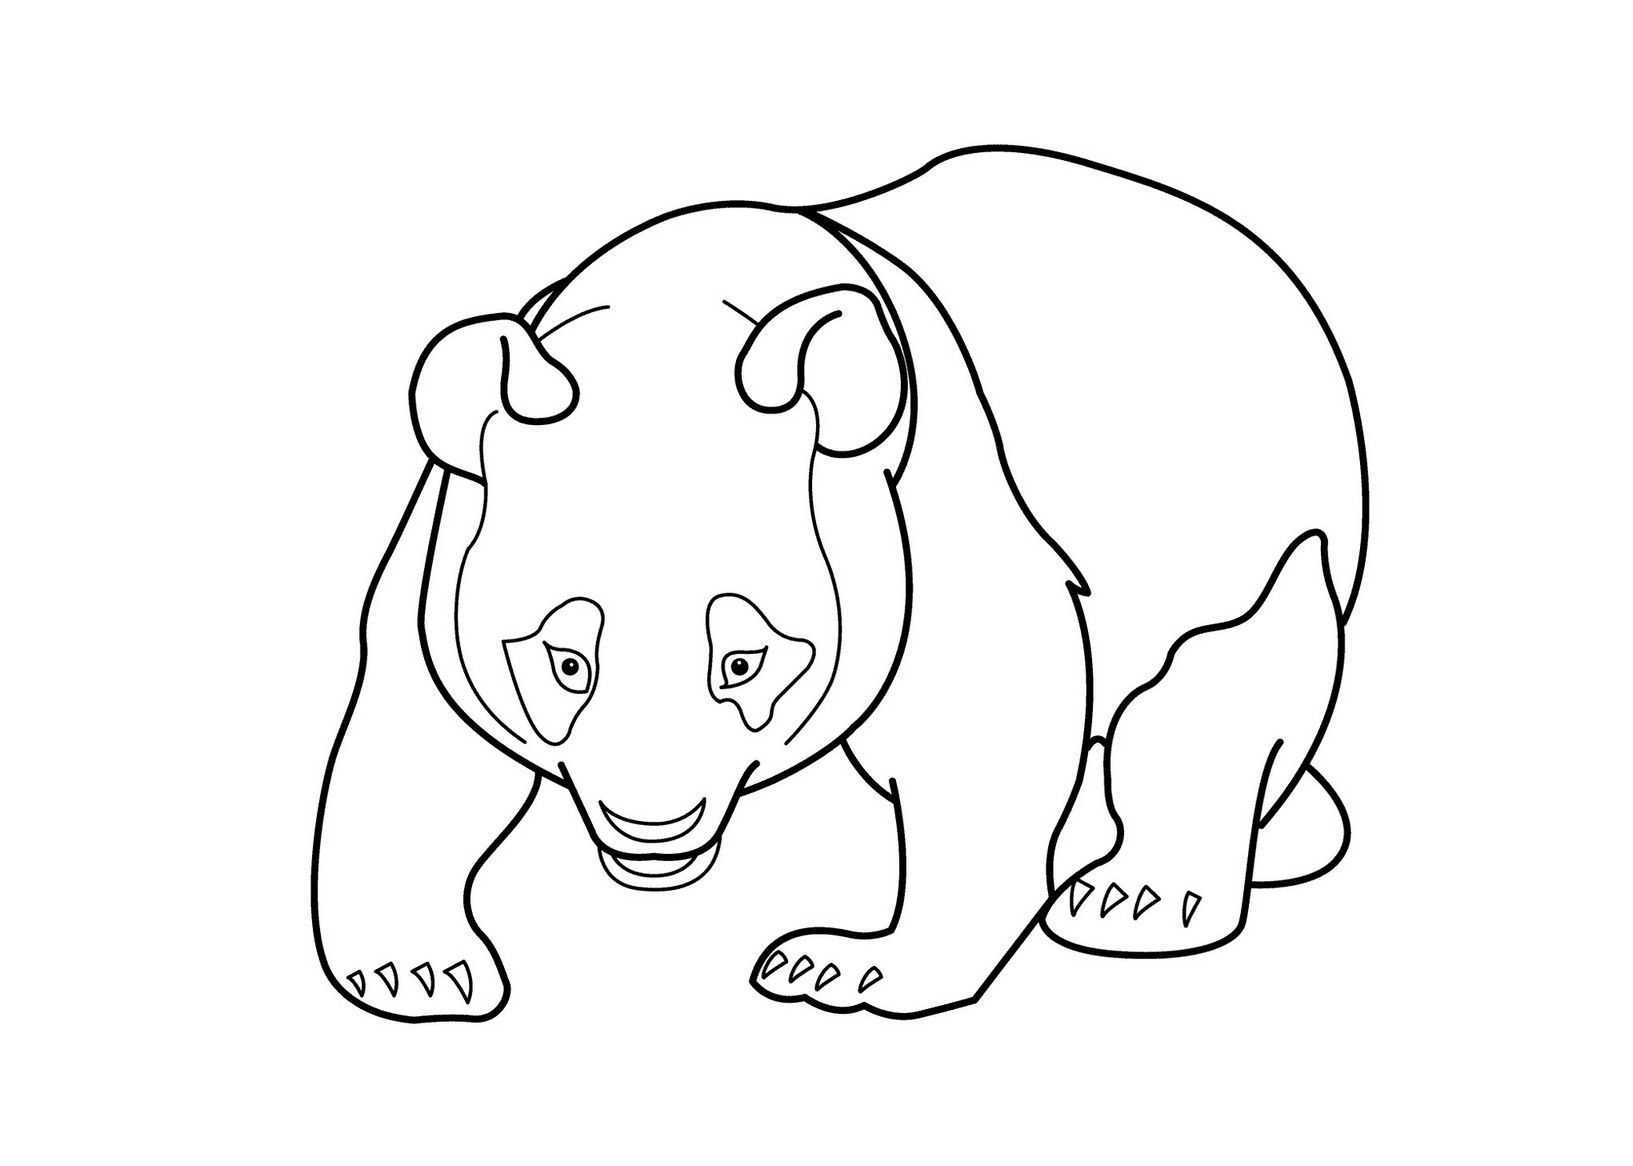 giant panda coloring pages